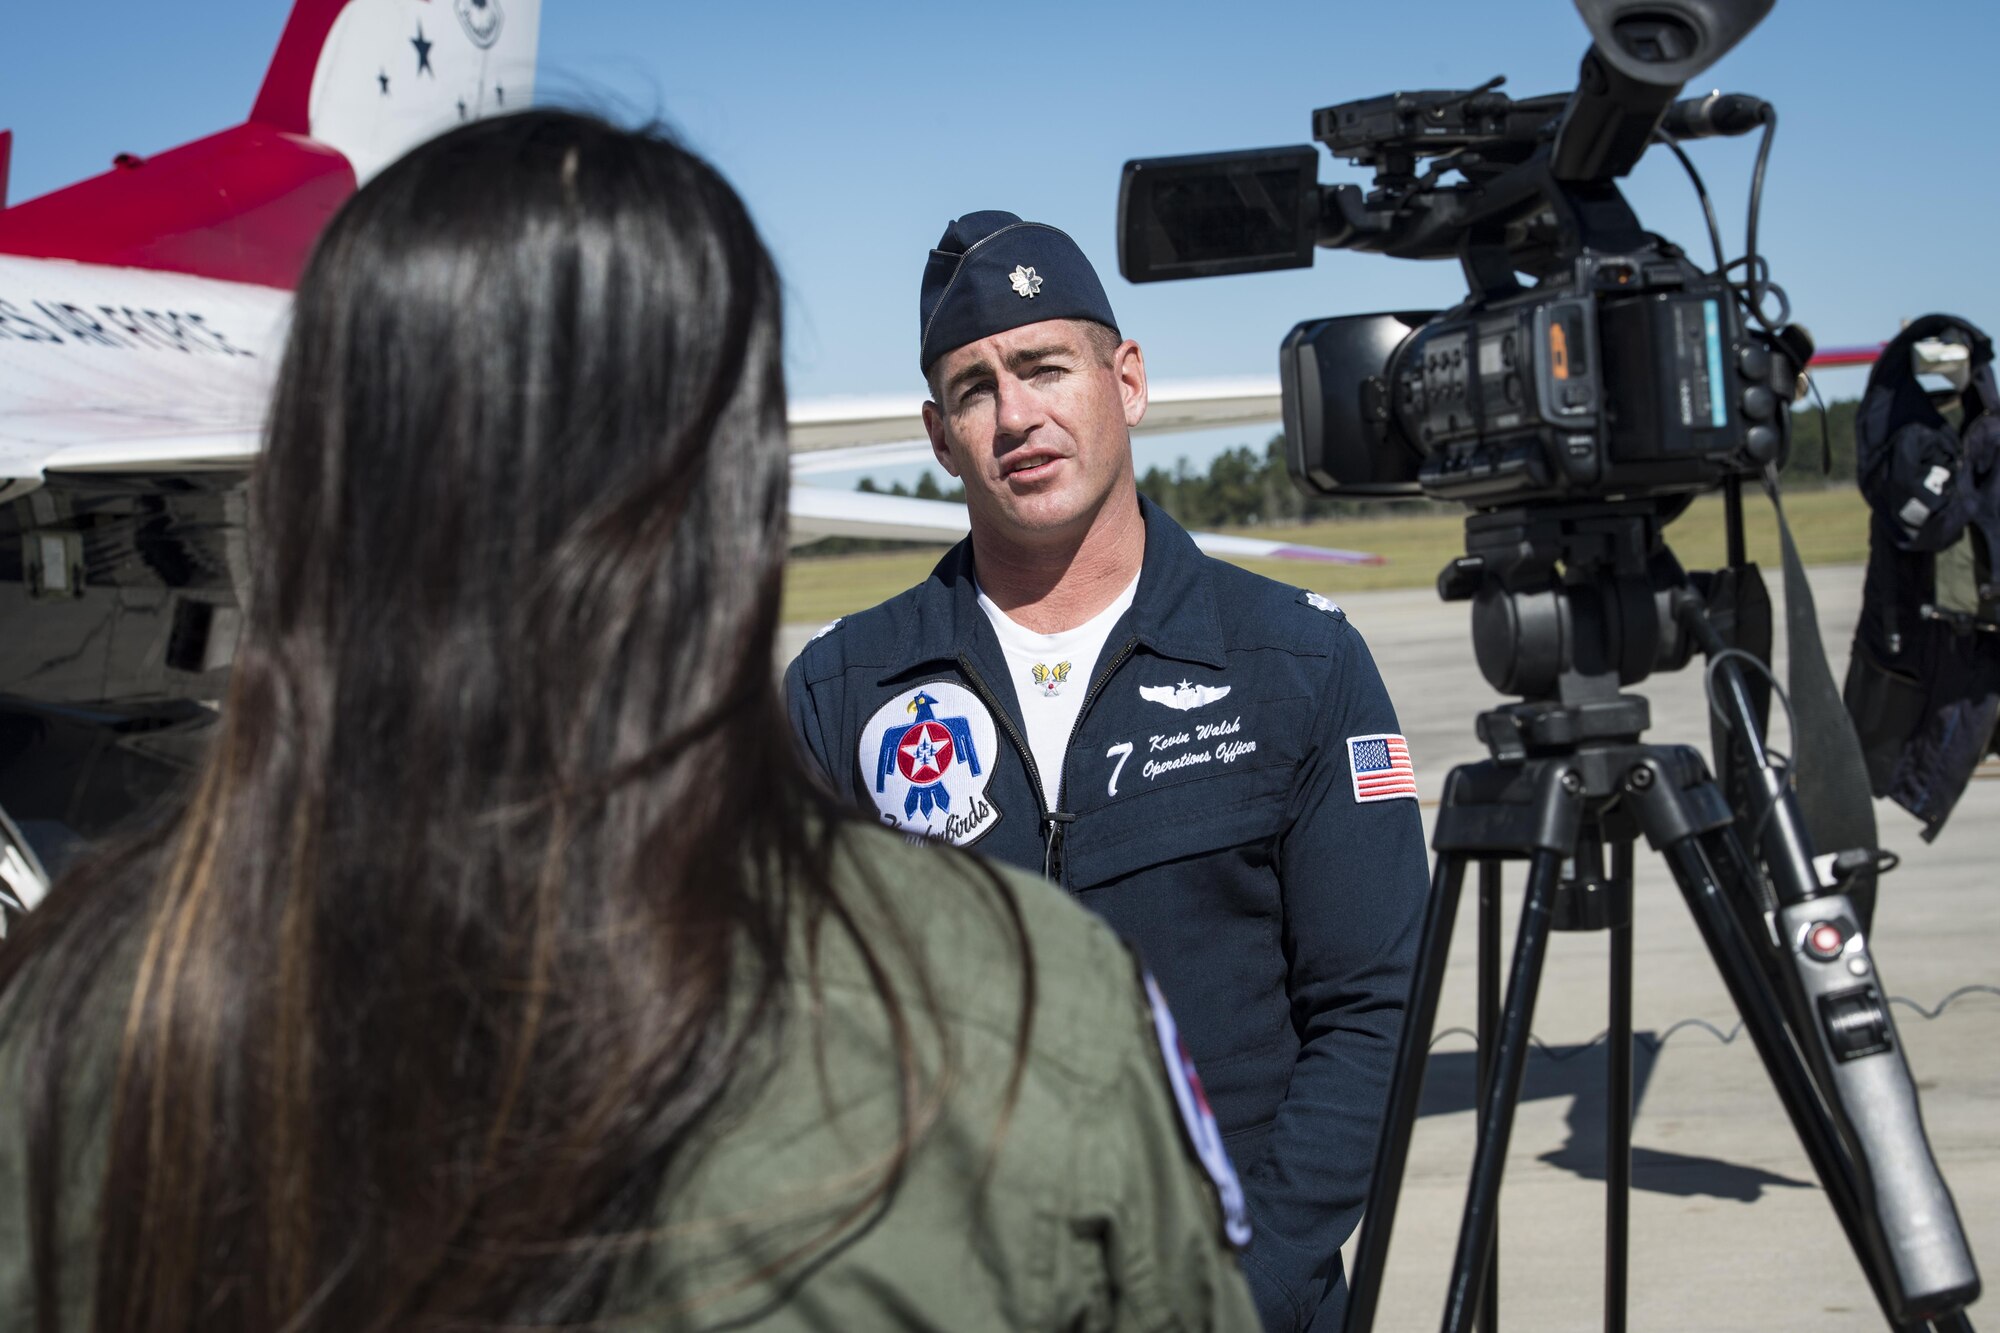 Noelani Mathews, multimedia journalist, interviews Lt. Col. Kevin Walsh, U.S. Air Force Thunderbird pilot No. 7, after her media flight in an F-16D Fighting Falcon, Oct. 27, 2017, at Moody Air Force Base, Ga. The Thunderbirds, based out of Nellis Air Force Base, Nev., are the Air Force’s premier aerial demonstration team, performing at air shows and special events worldwide. (U.S. Air Force photo by Senior Airman Janiqua P. Robinson)